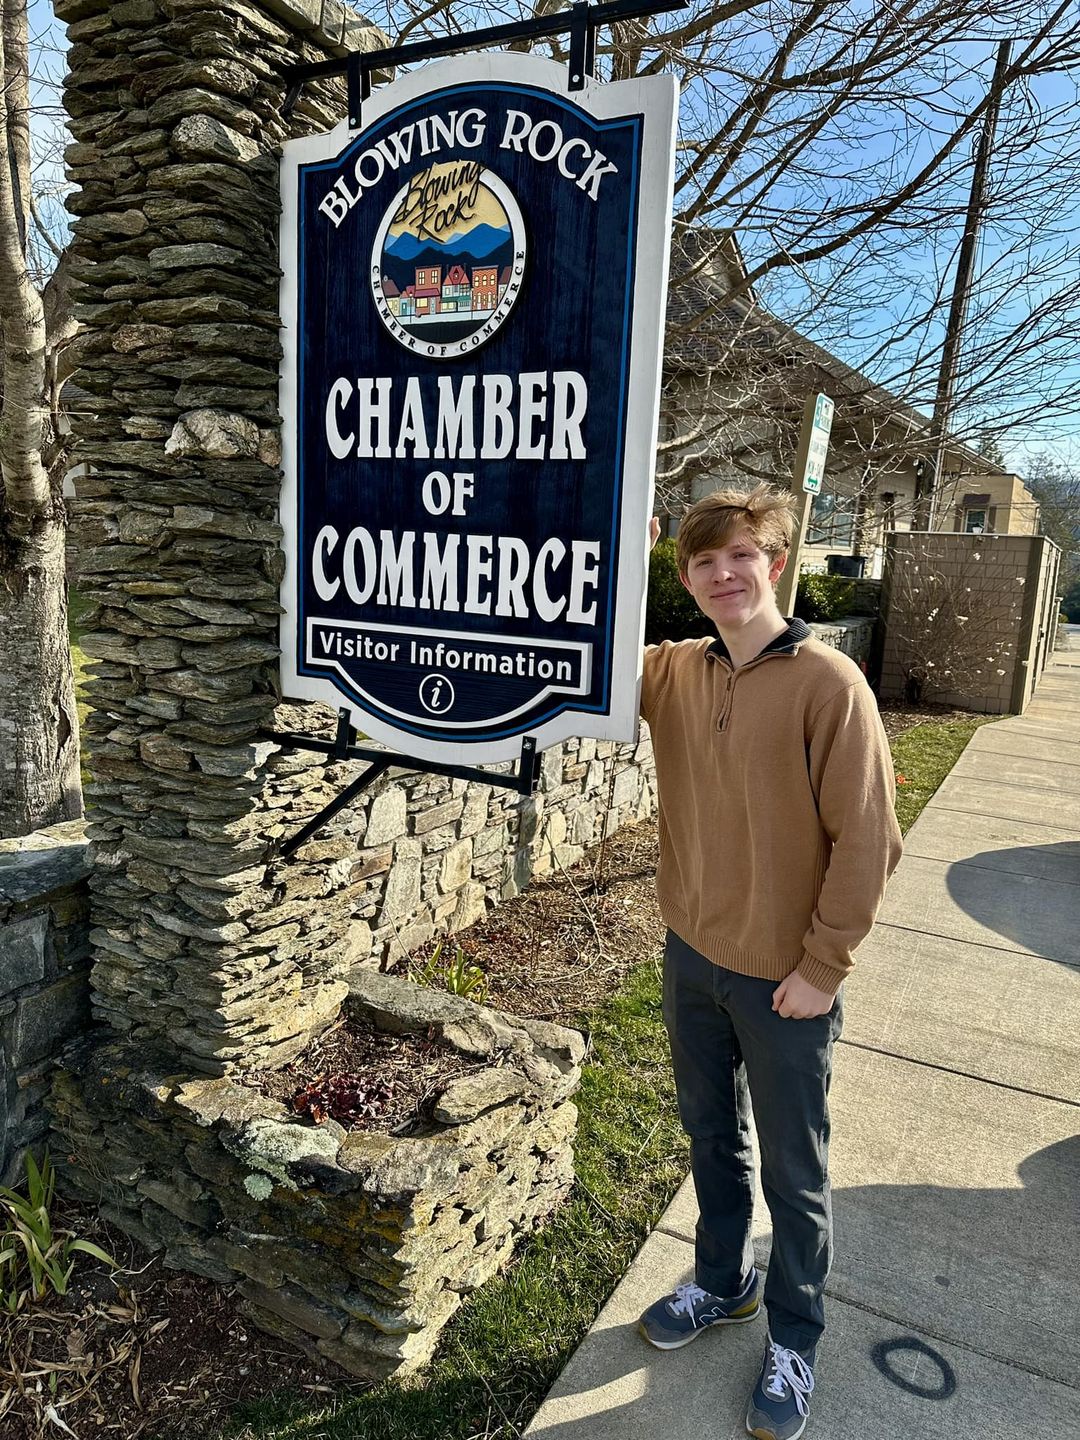 Blowing Rock Chamber of Commerce